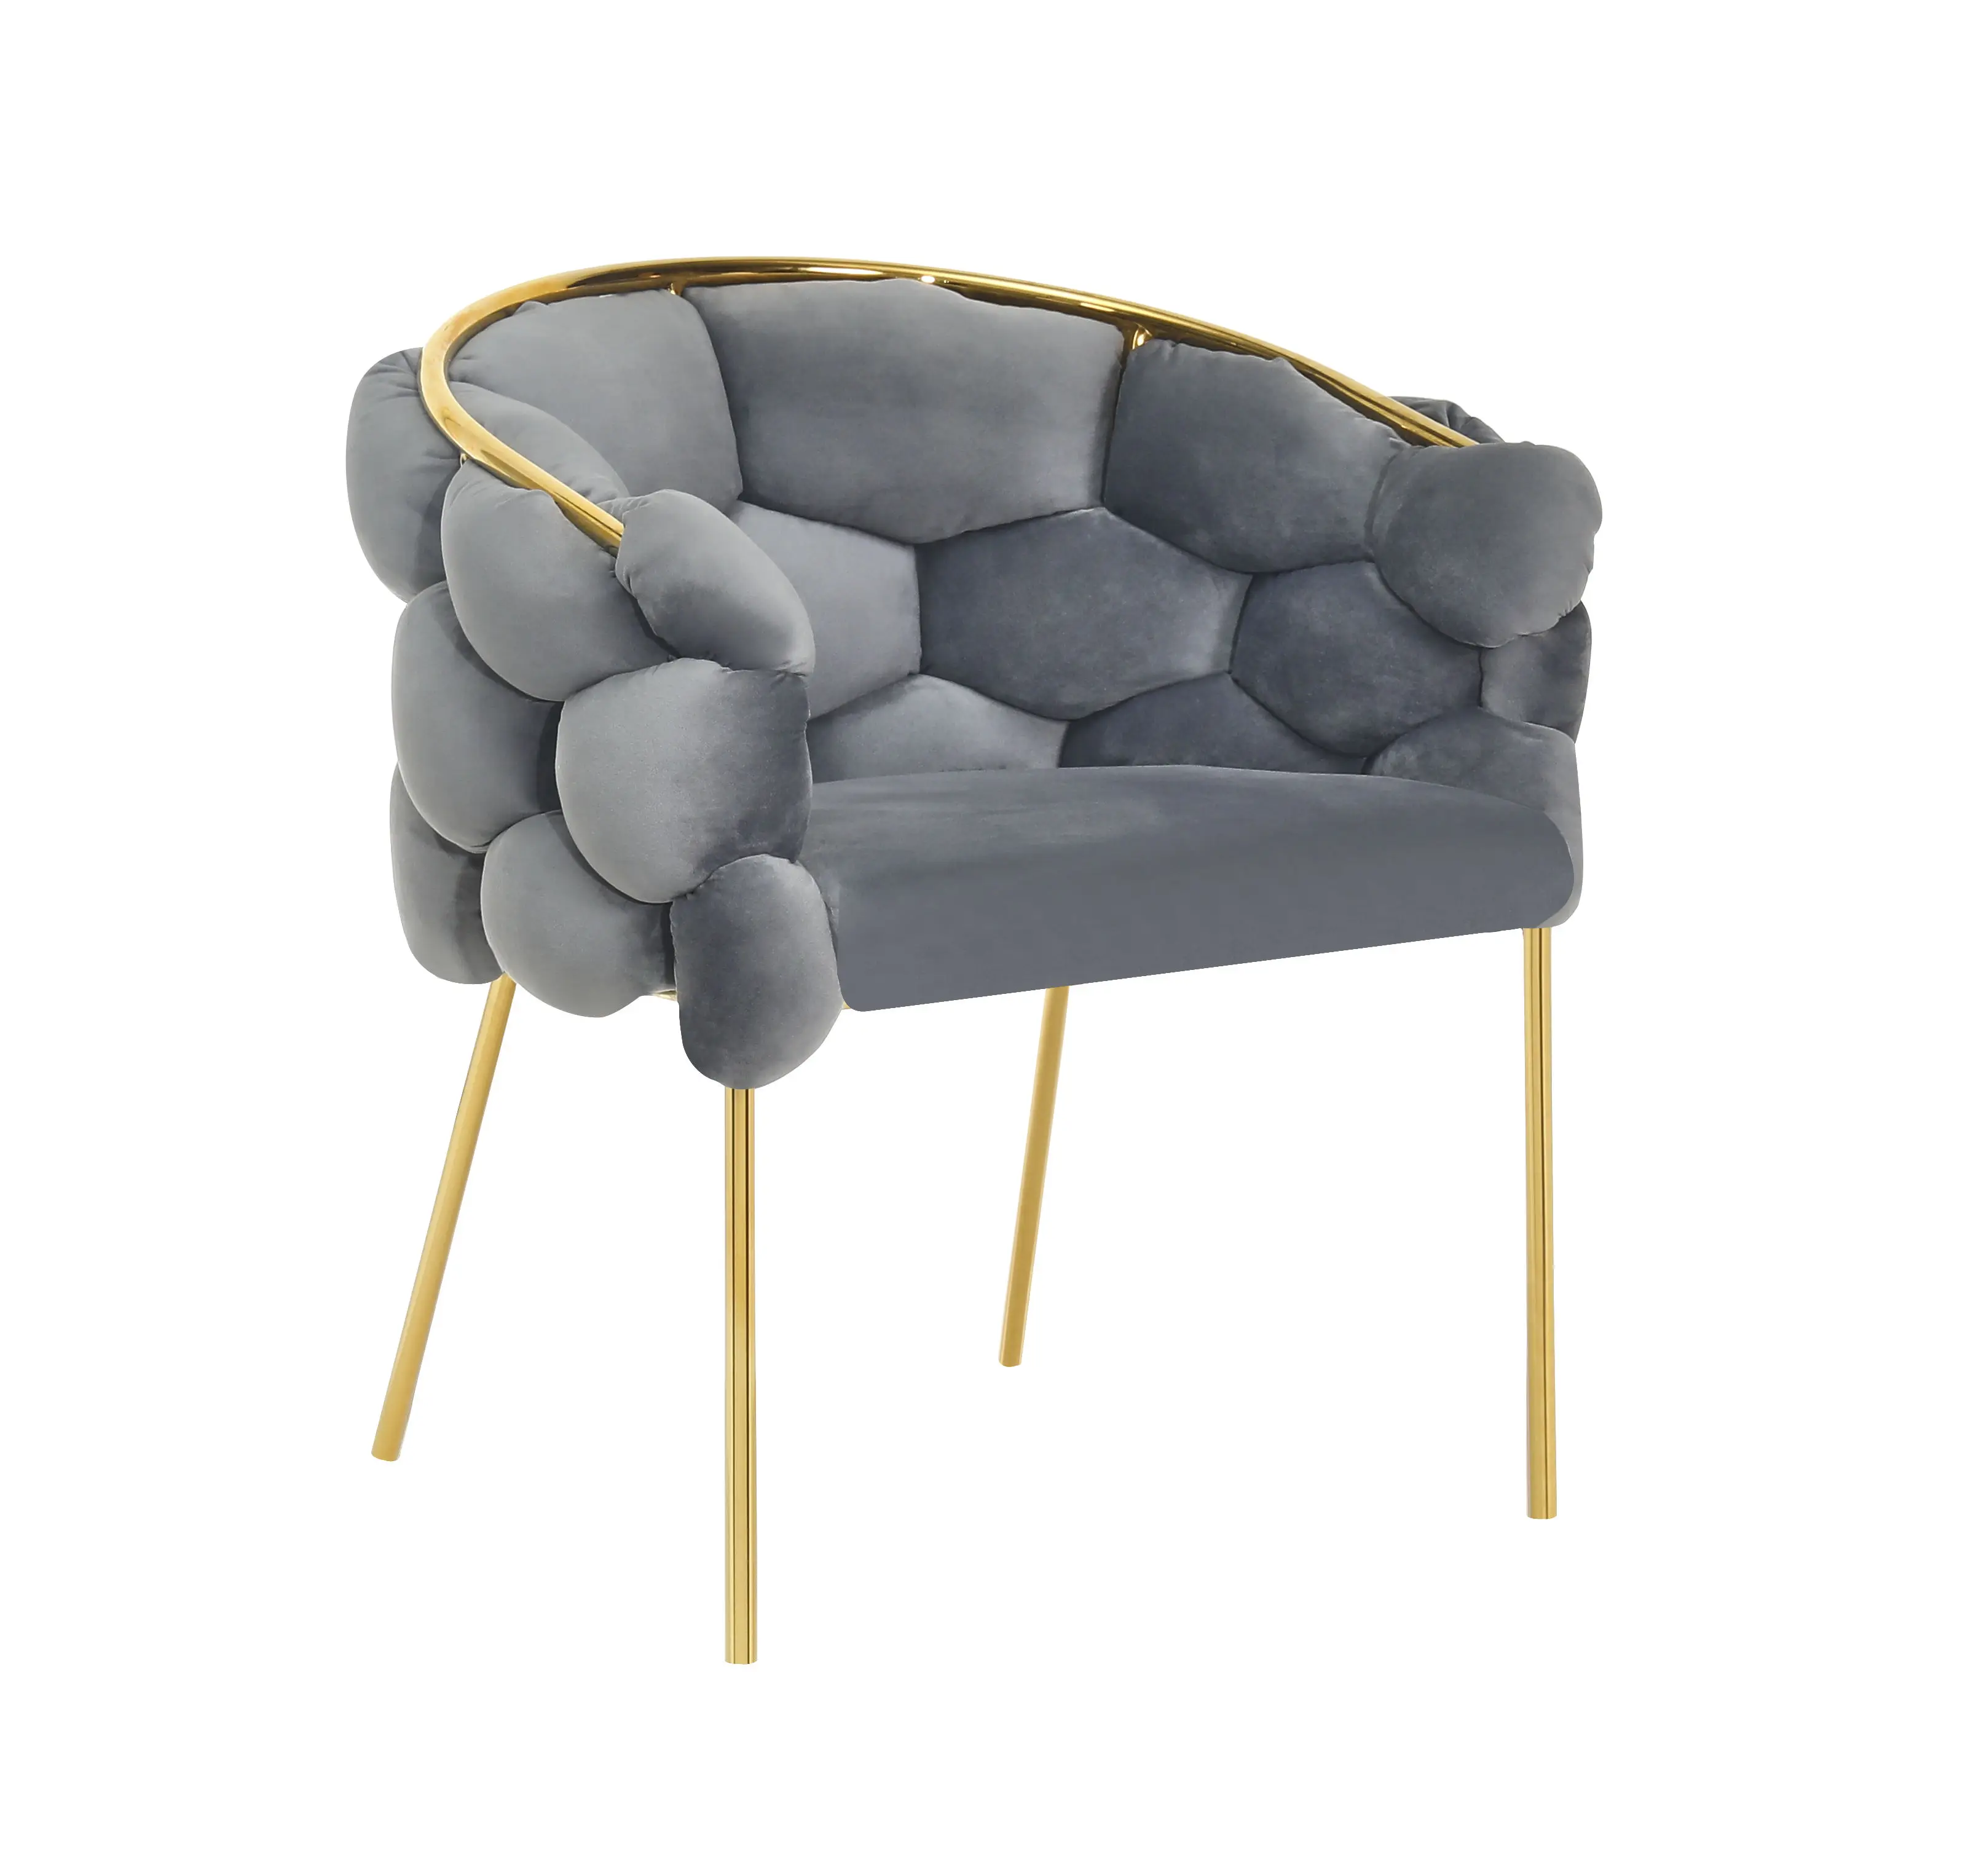 

WSX102 Modern velvet luxury chaise light luxury home chair leisure chair modern living room chairs with gold metal legs